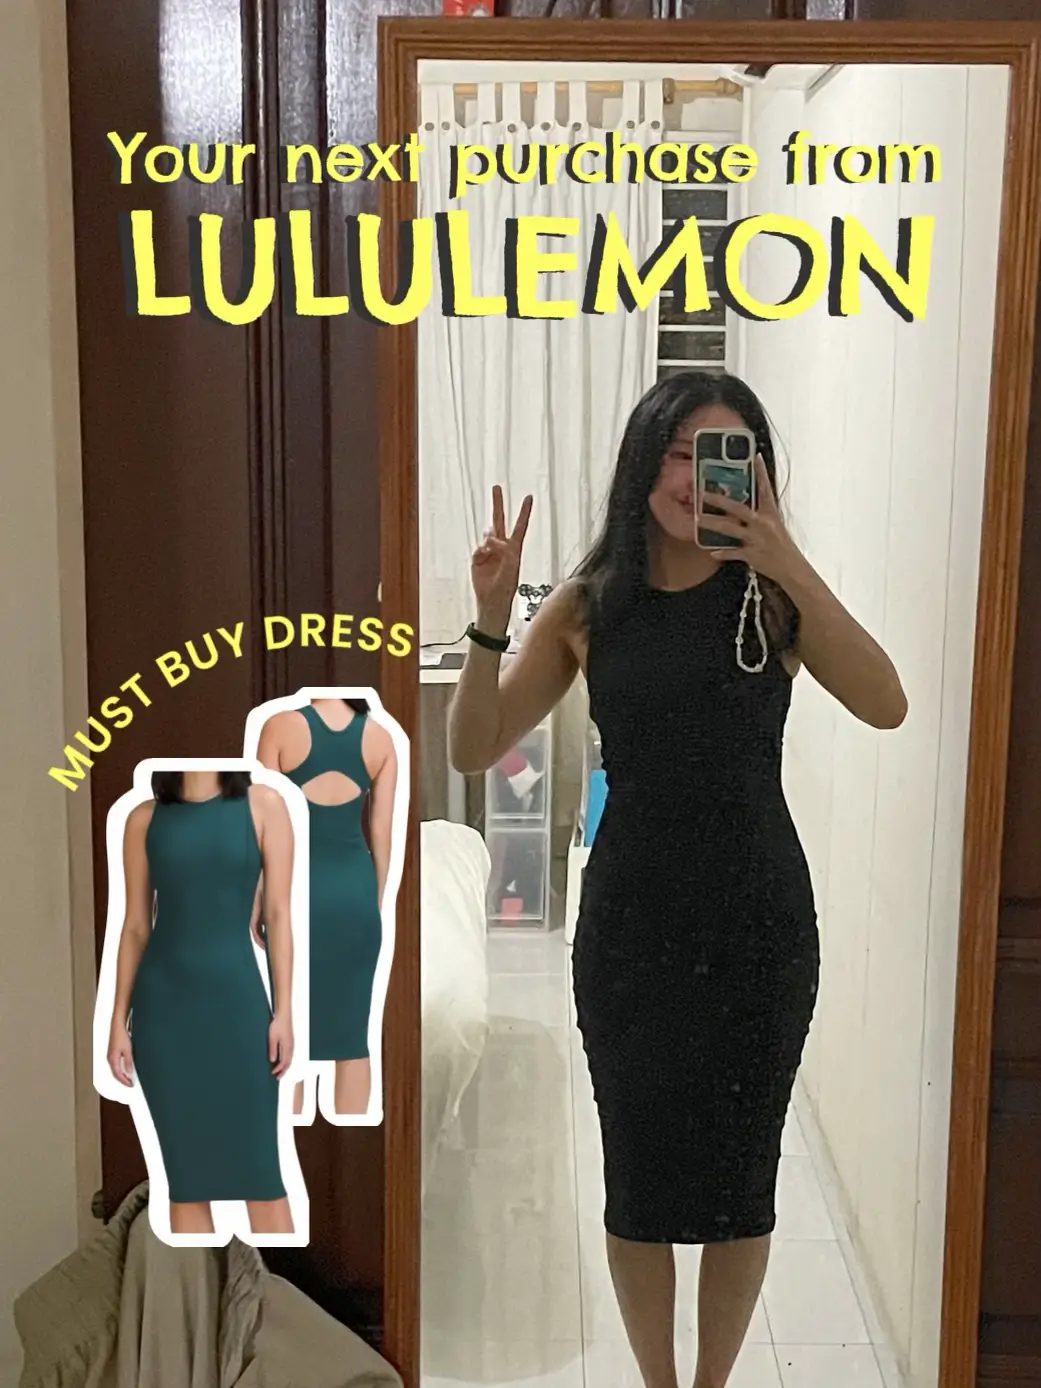 This Lululemon dress is better than SKIMS 🤩❤️‍🔥, Gallery posted by  Valerie T